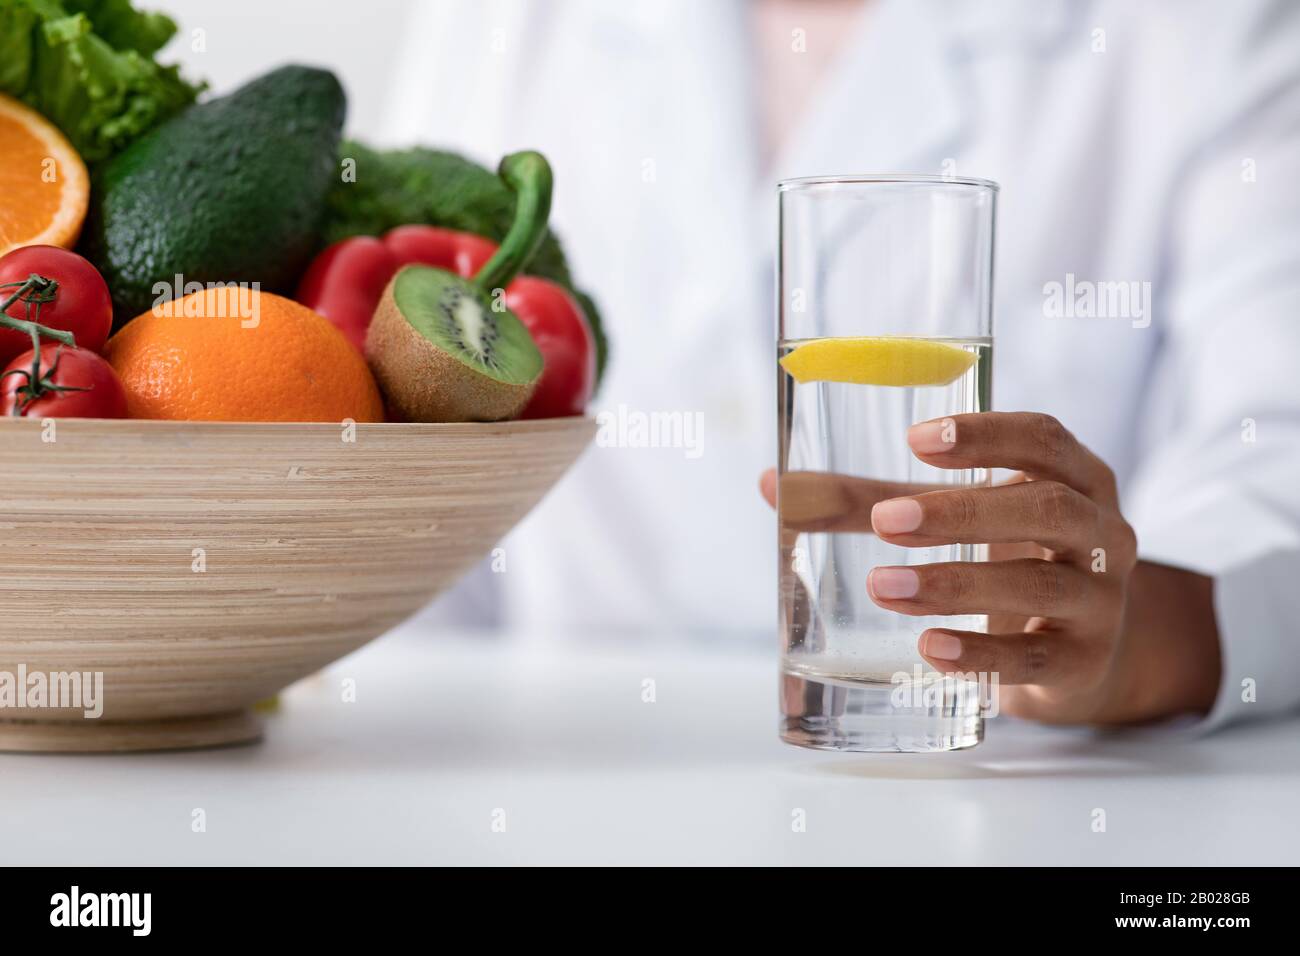 Nutritionist promoting healthy eating, offering lemon water Stock Photo